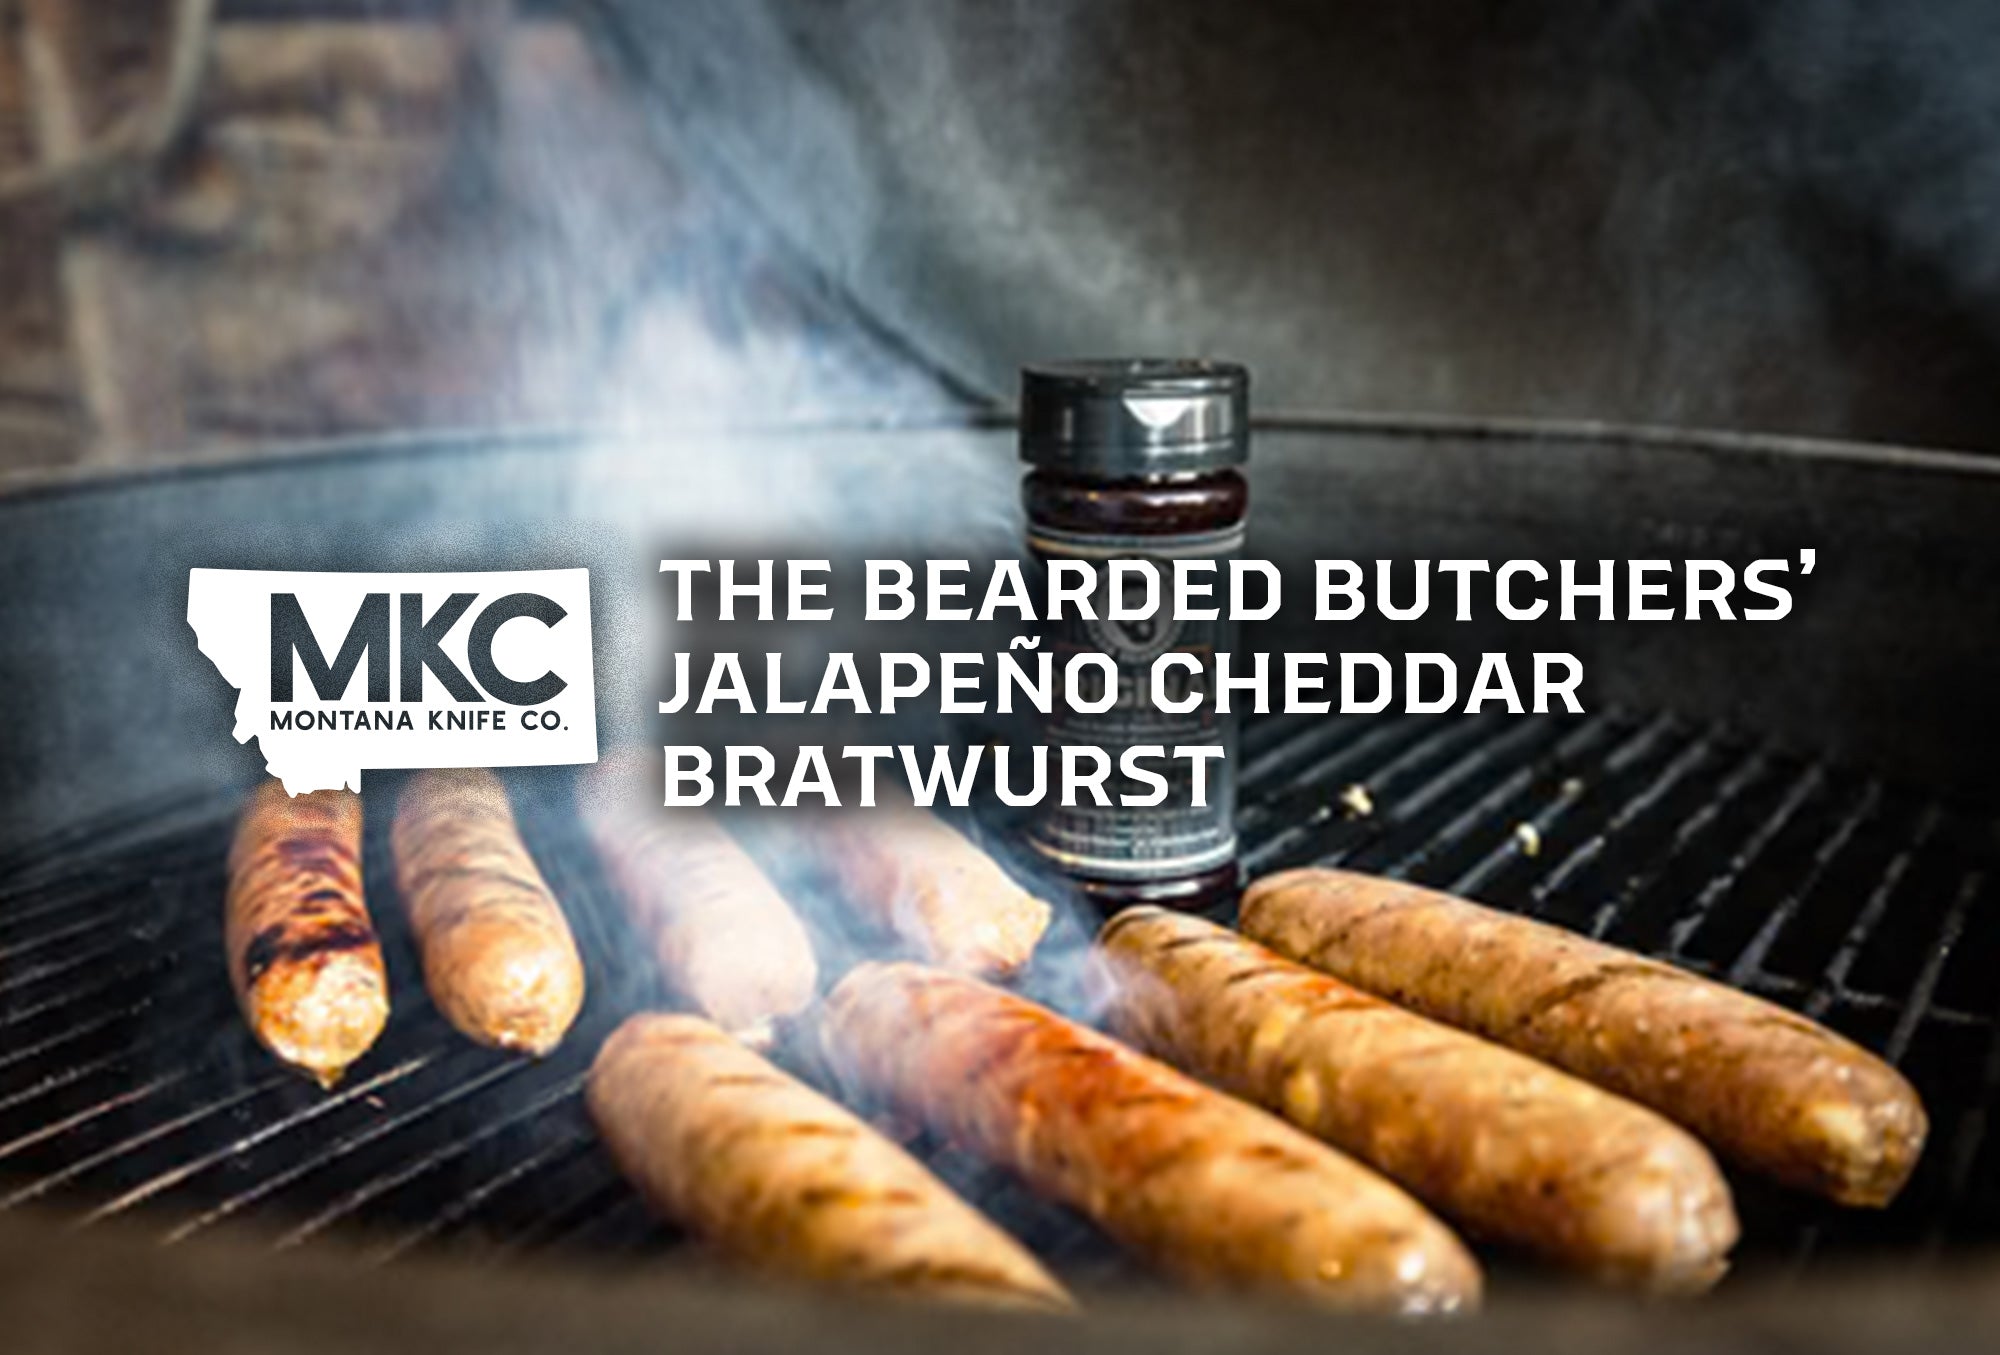 Cheddar bratwurst grilling and smoking on a grill with a Bearded Butcher Bratwurst Seasoning container.